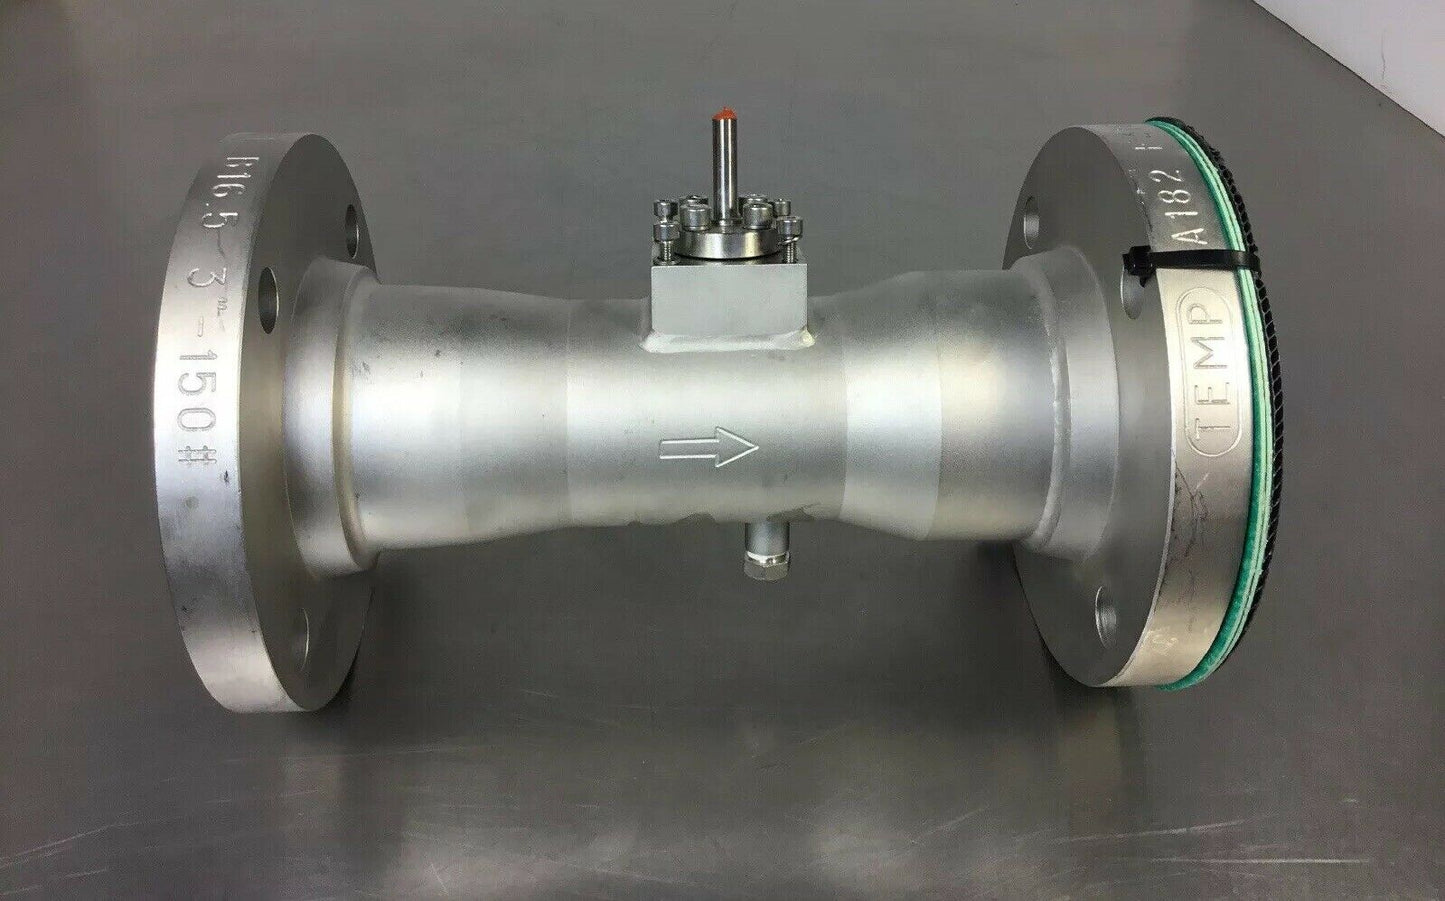 TEMP 3" Flanged Valve, Stainless Steel A182 F316L B16.5 3”-150#  Loc.Wall